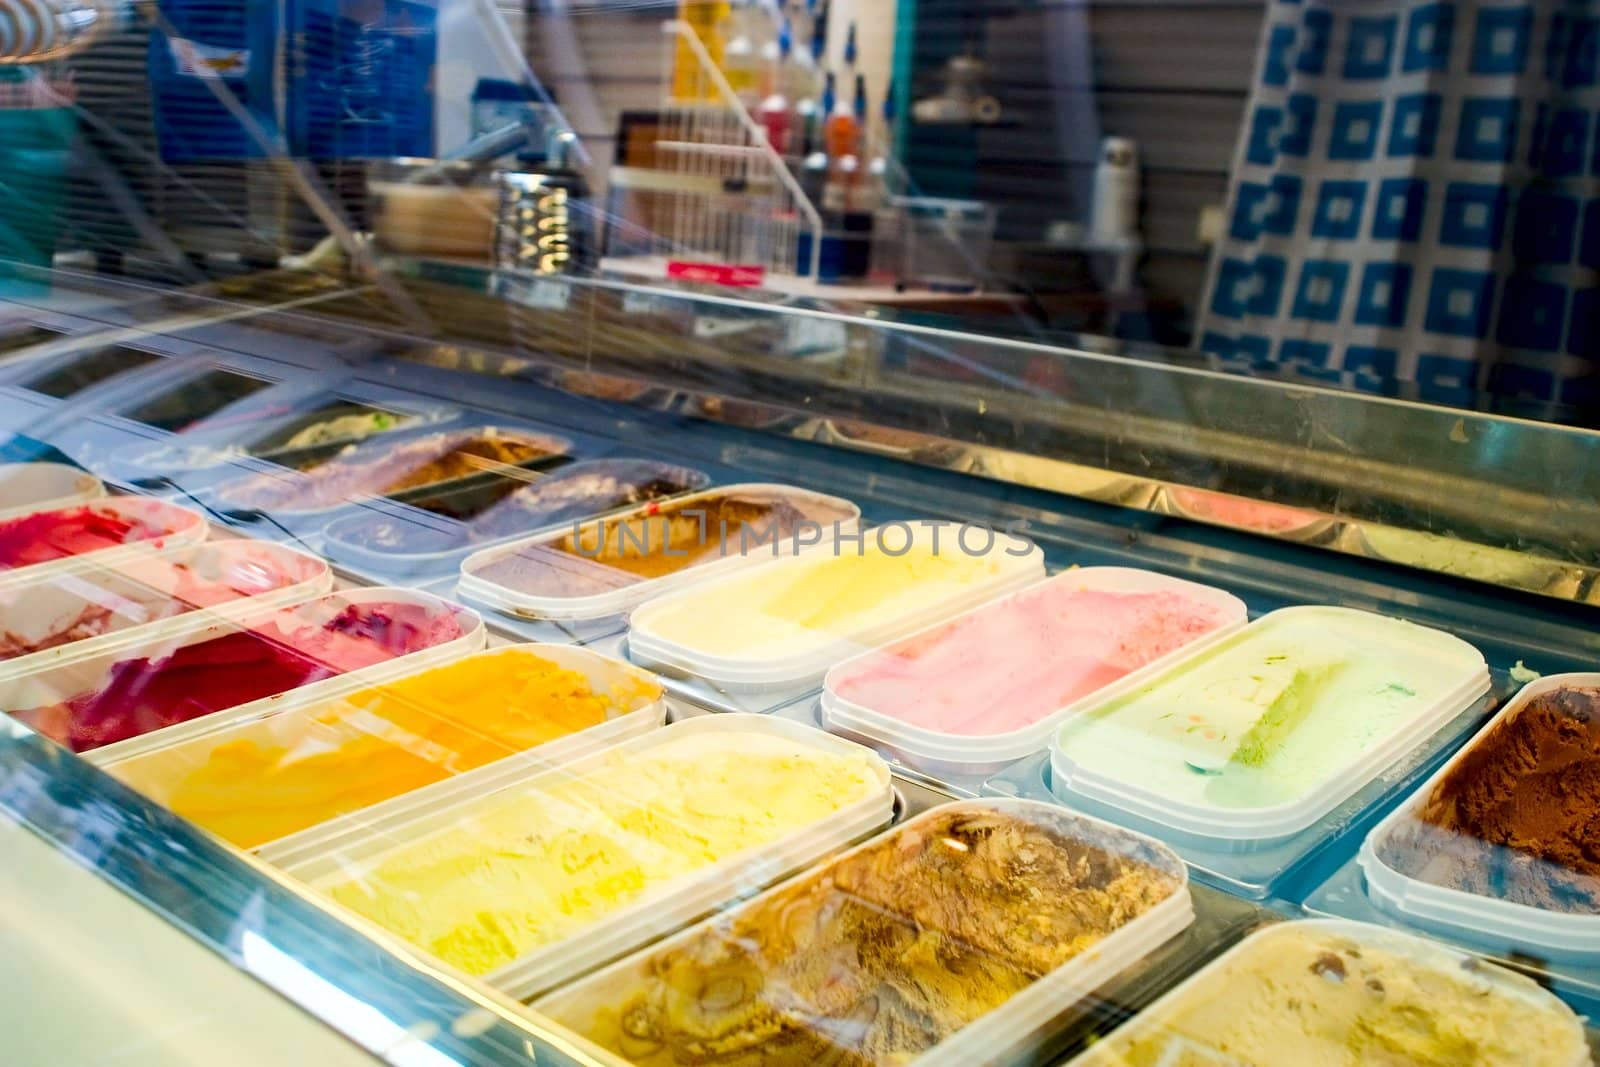 Rows of ice cream behind glass with reflection